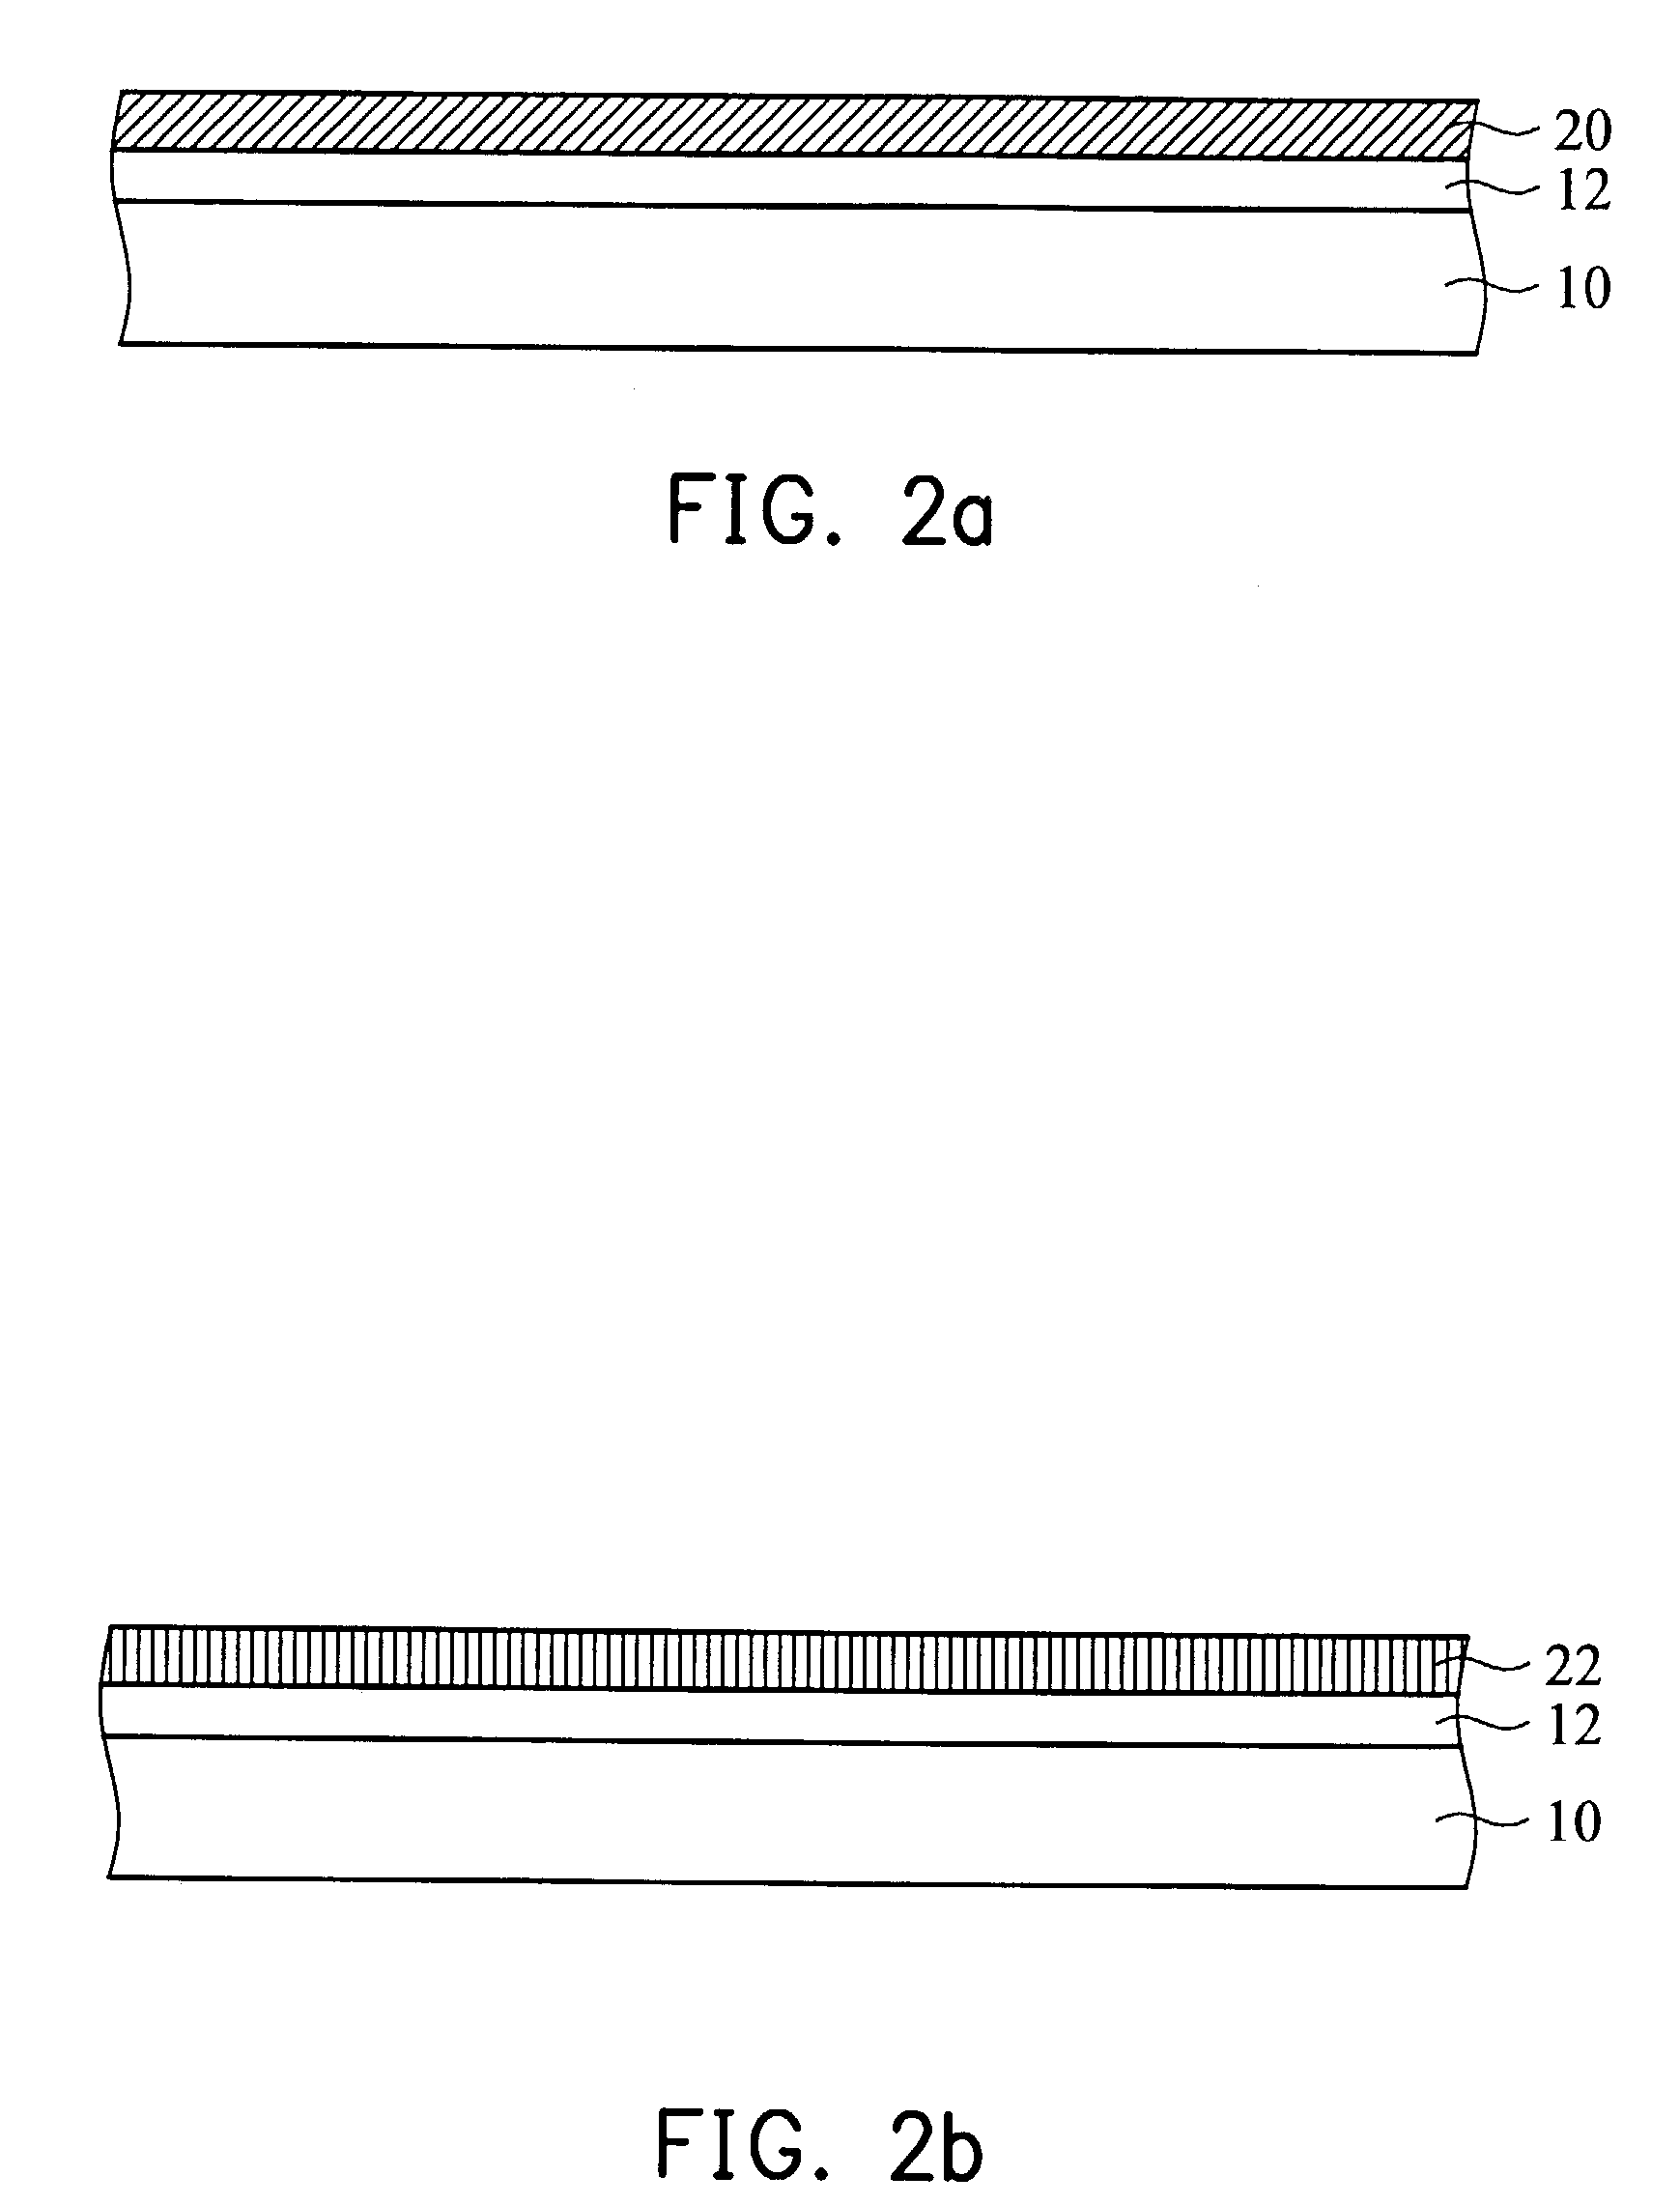 Process for cleaning silicon surface and fabrication of thin film transistor by the process